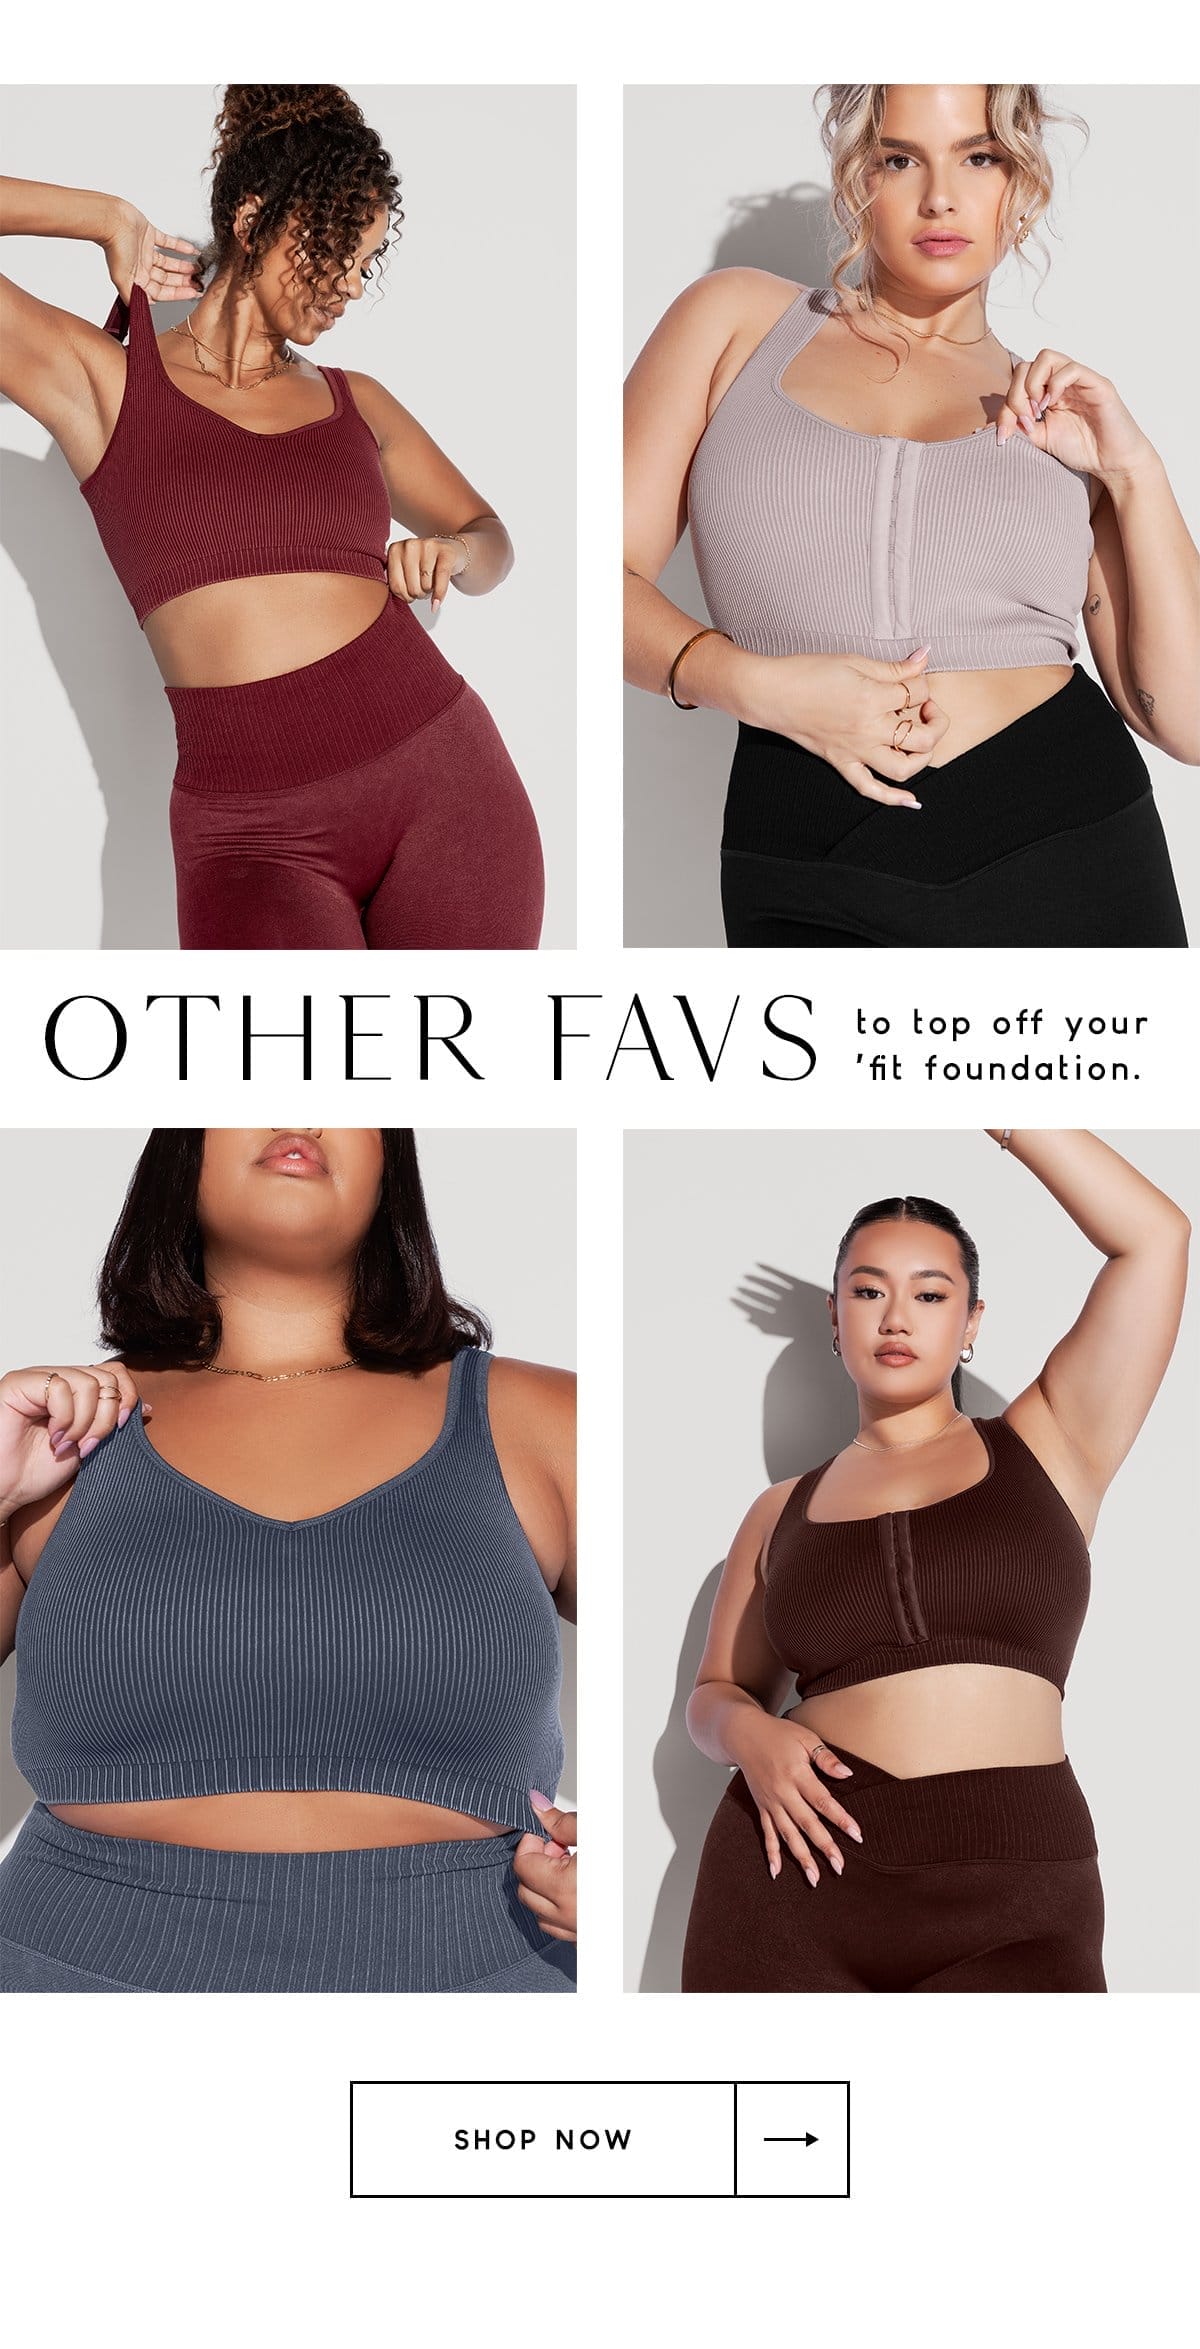 Seamless Collection